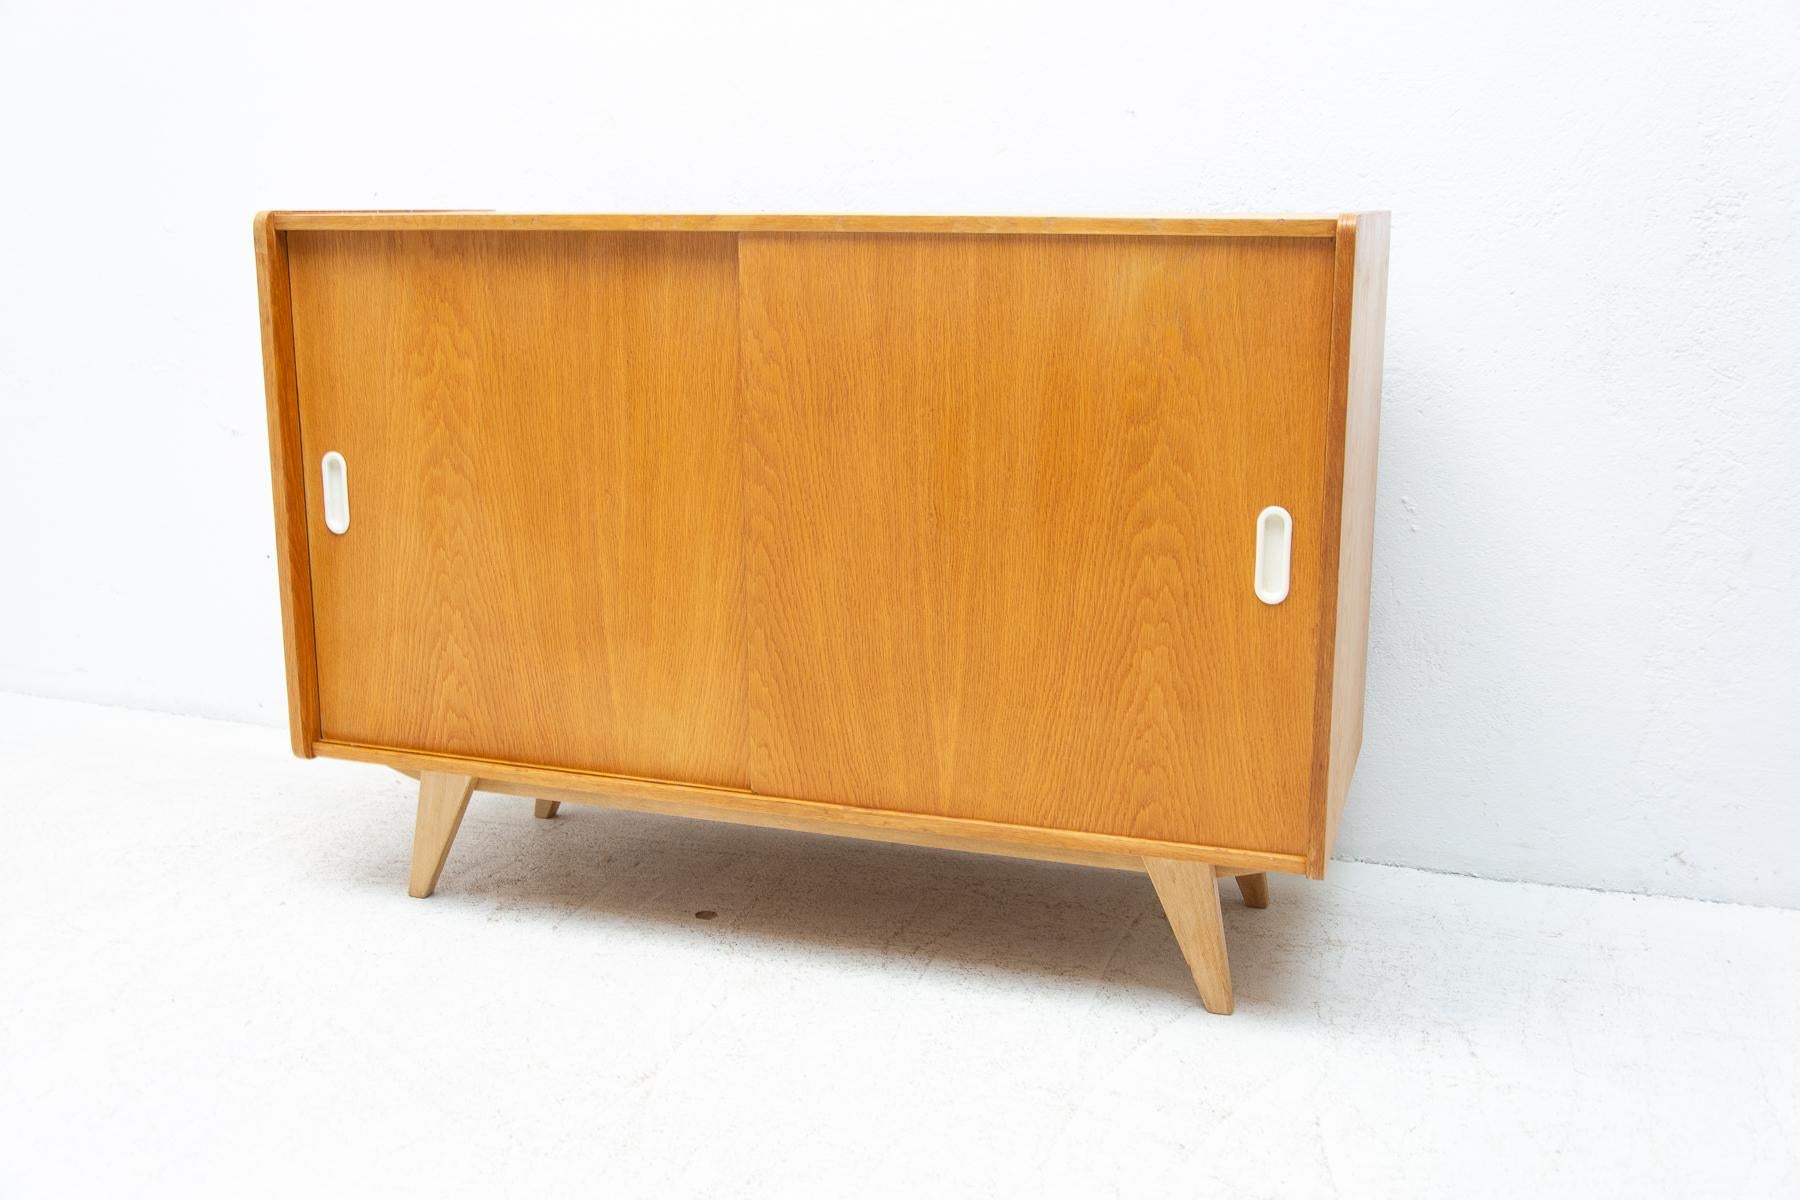 Mid century sideboard with sliding doors and one long shelf inside, designed by Jirí Jiroutek in the 1960´s. It´s made of oak and plywood. In very good condition, only one small stain on the top.

Measures: Height: 77 cm

lenght: 110